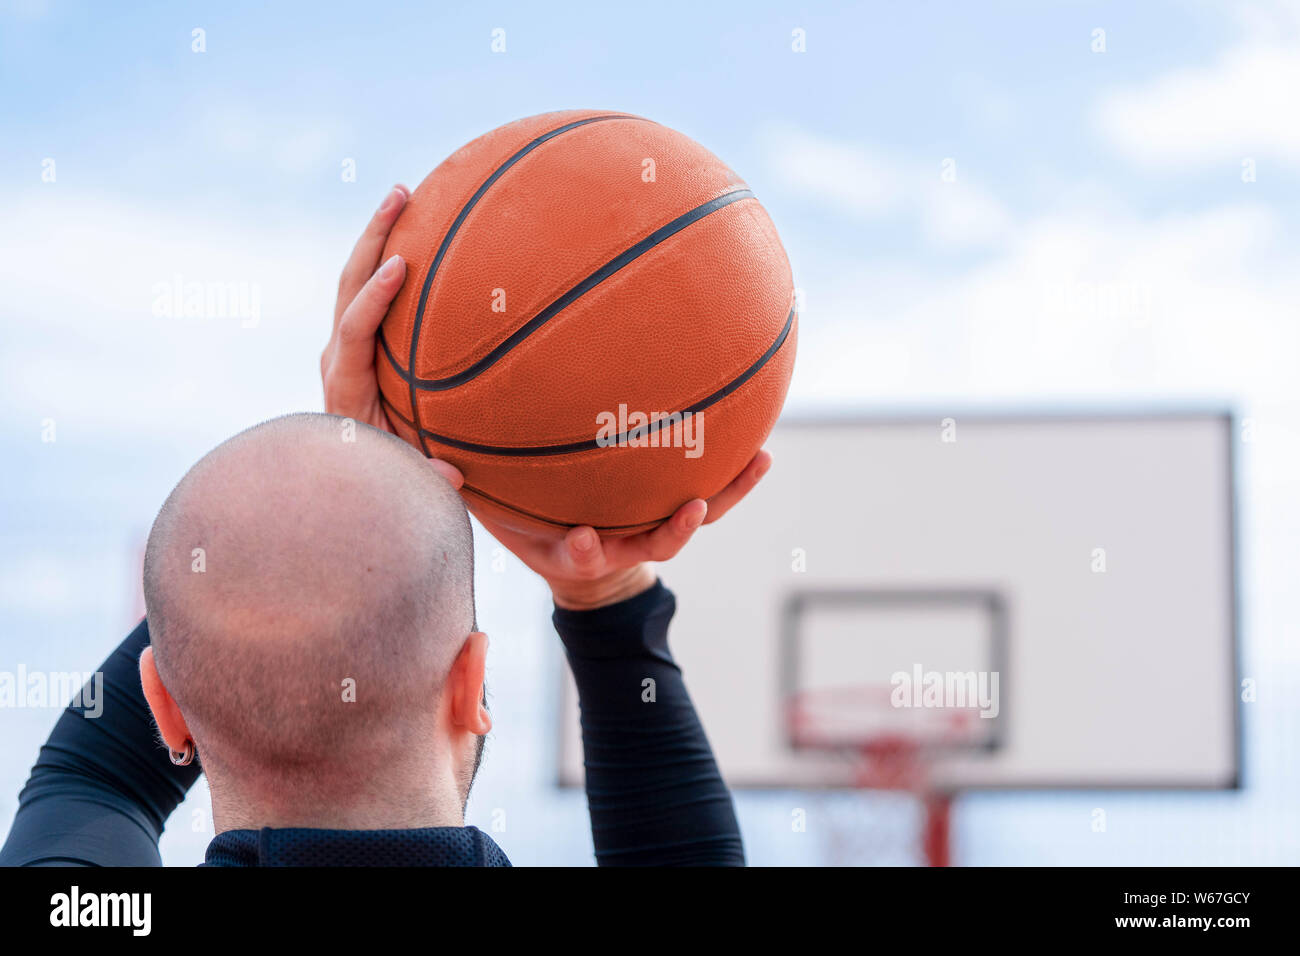 Close up of attractive man playing basketball on the basketball court. Man is on focus and foreground, background and hoop is blurred. Stock Photo